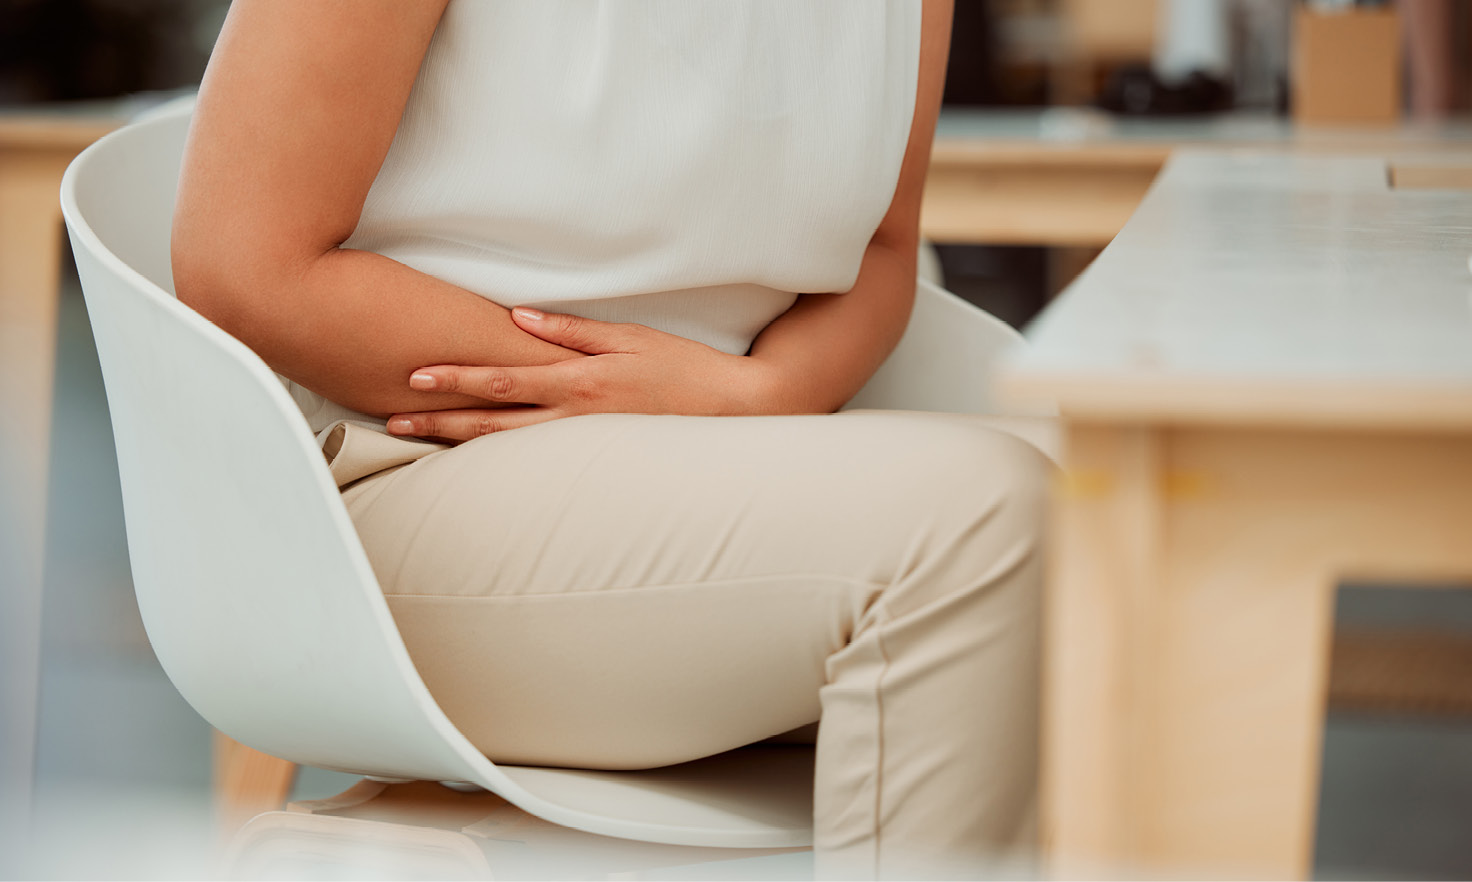 No one knows the exact cause of IBS, but your health care provider may run different tests to rule out other conditions.  